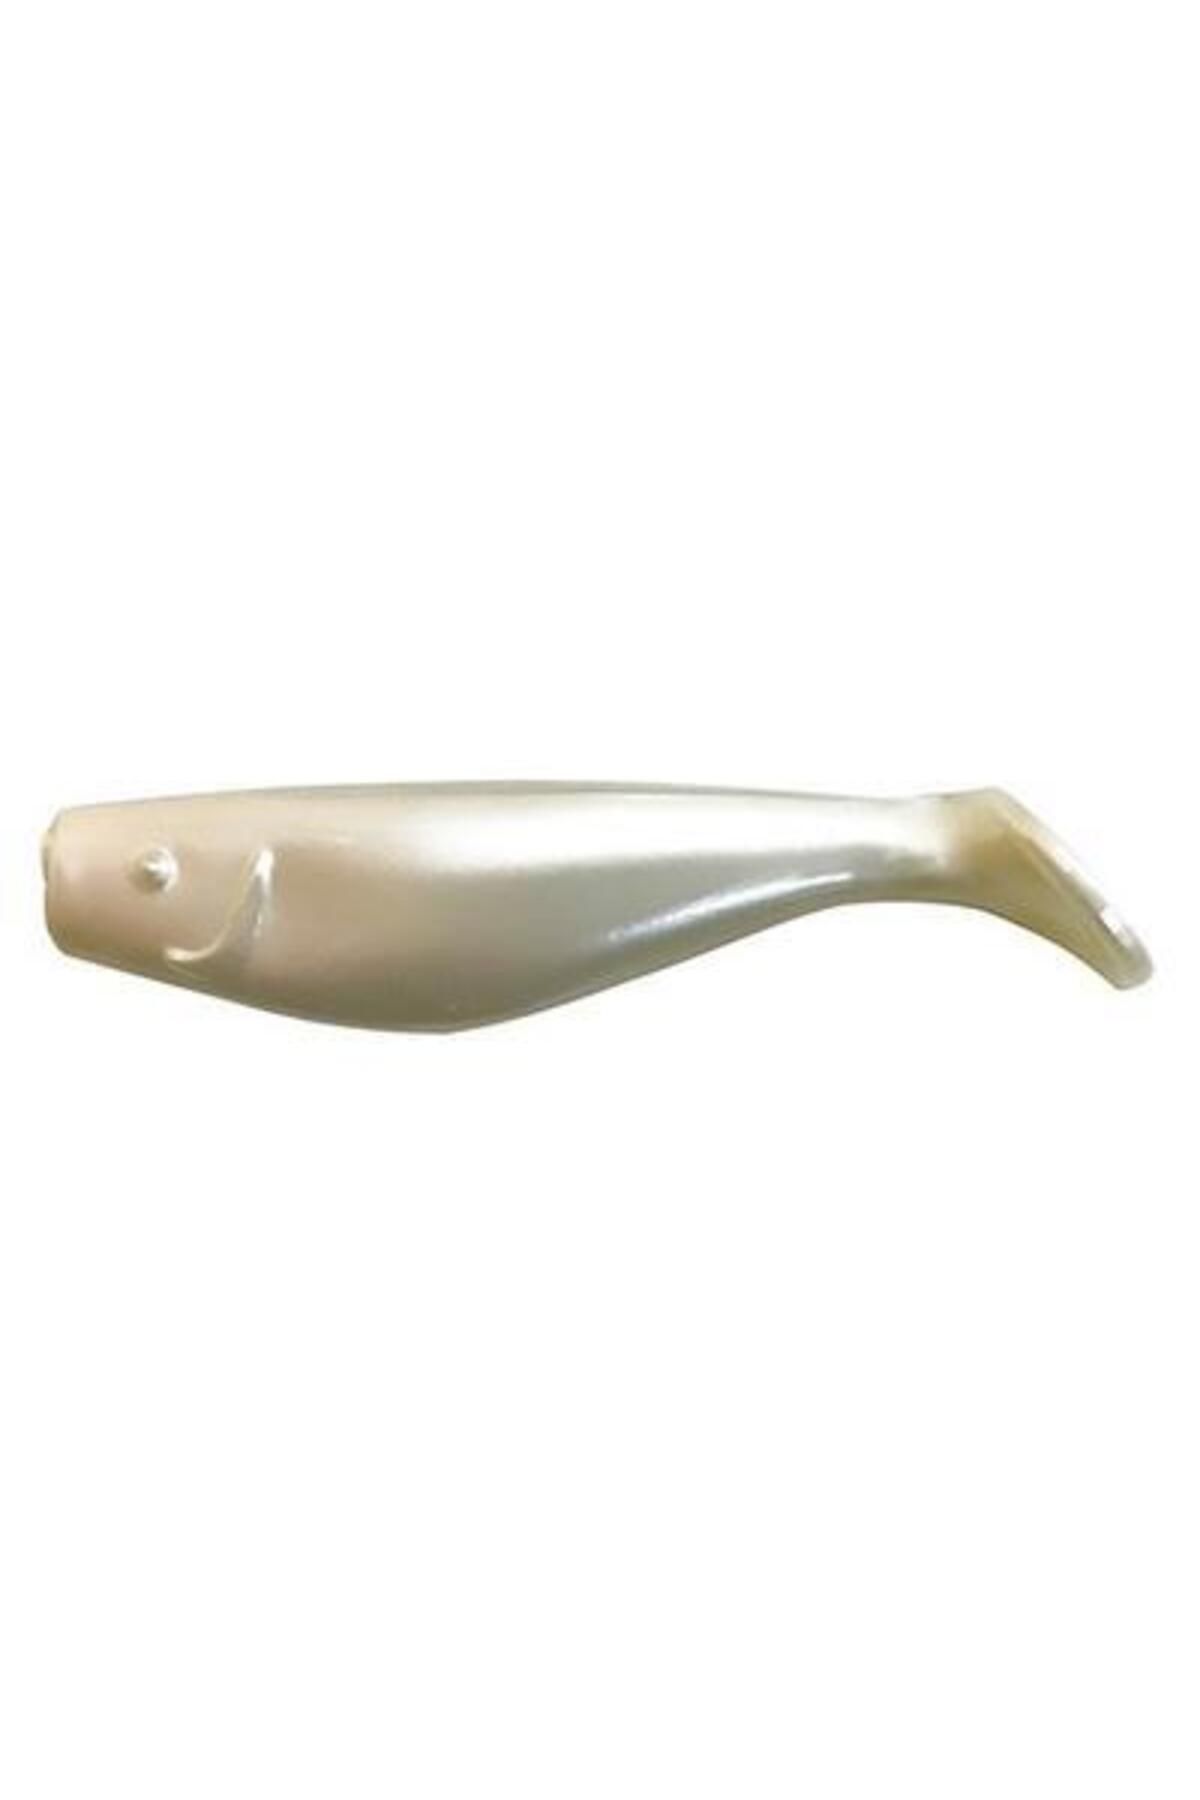 Nikko Sculler Shad 2.7 Inch #921 Pearl White